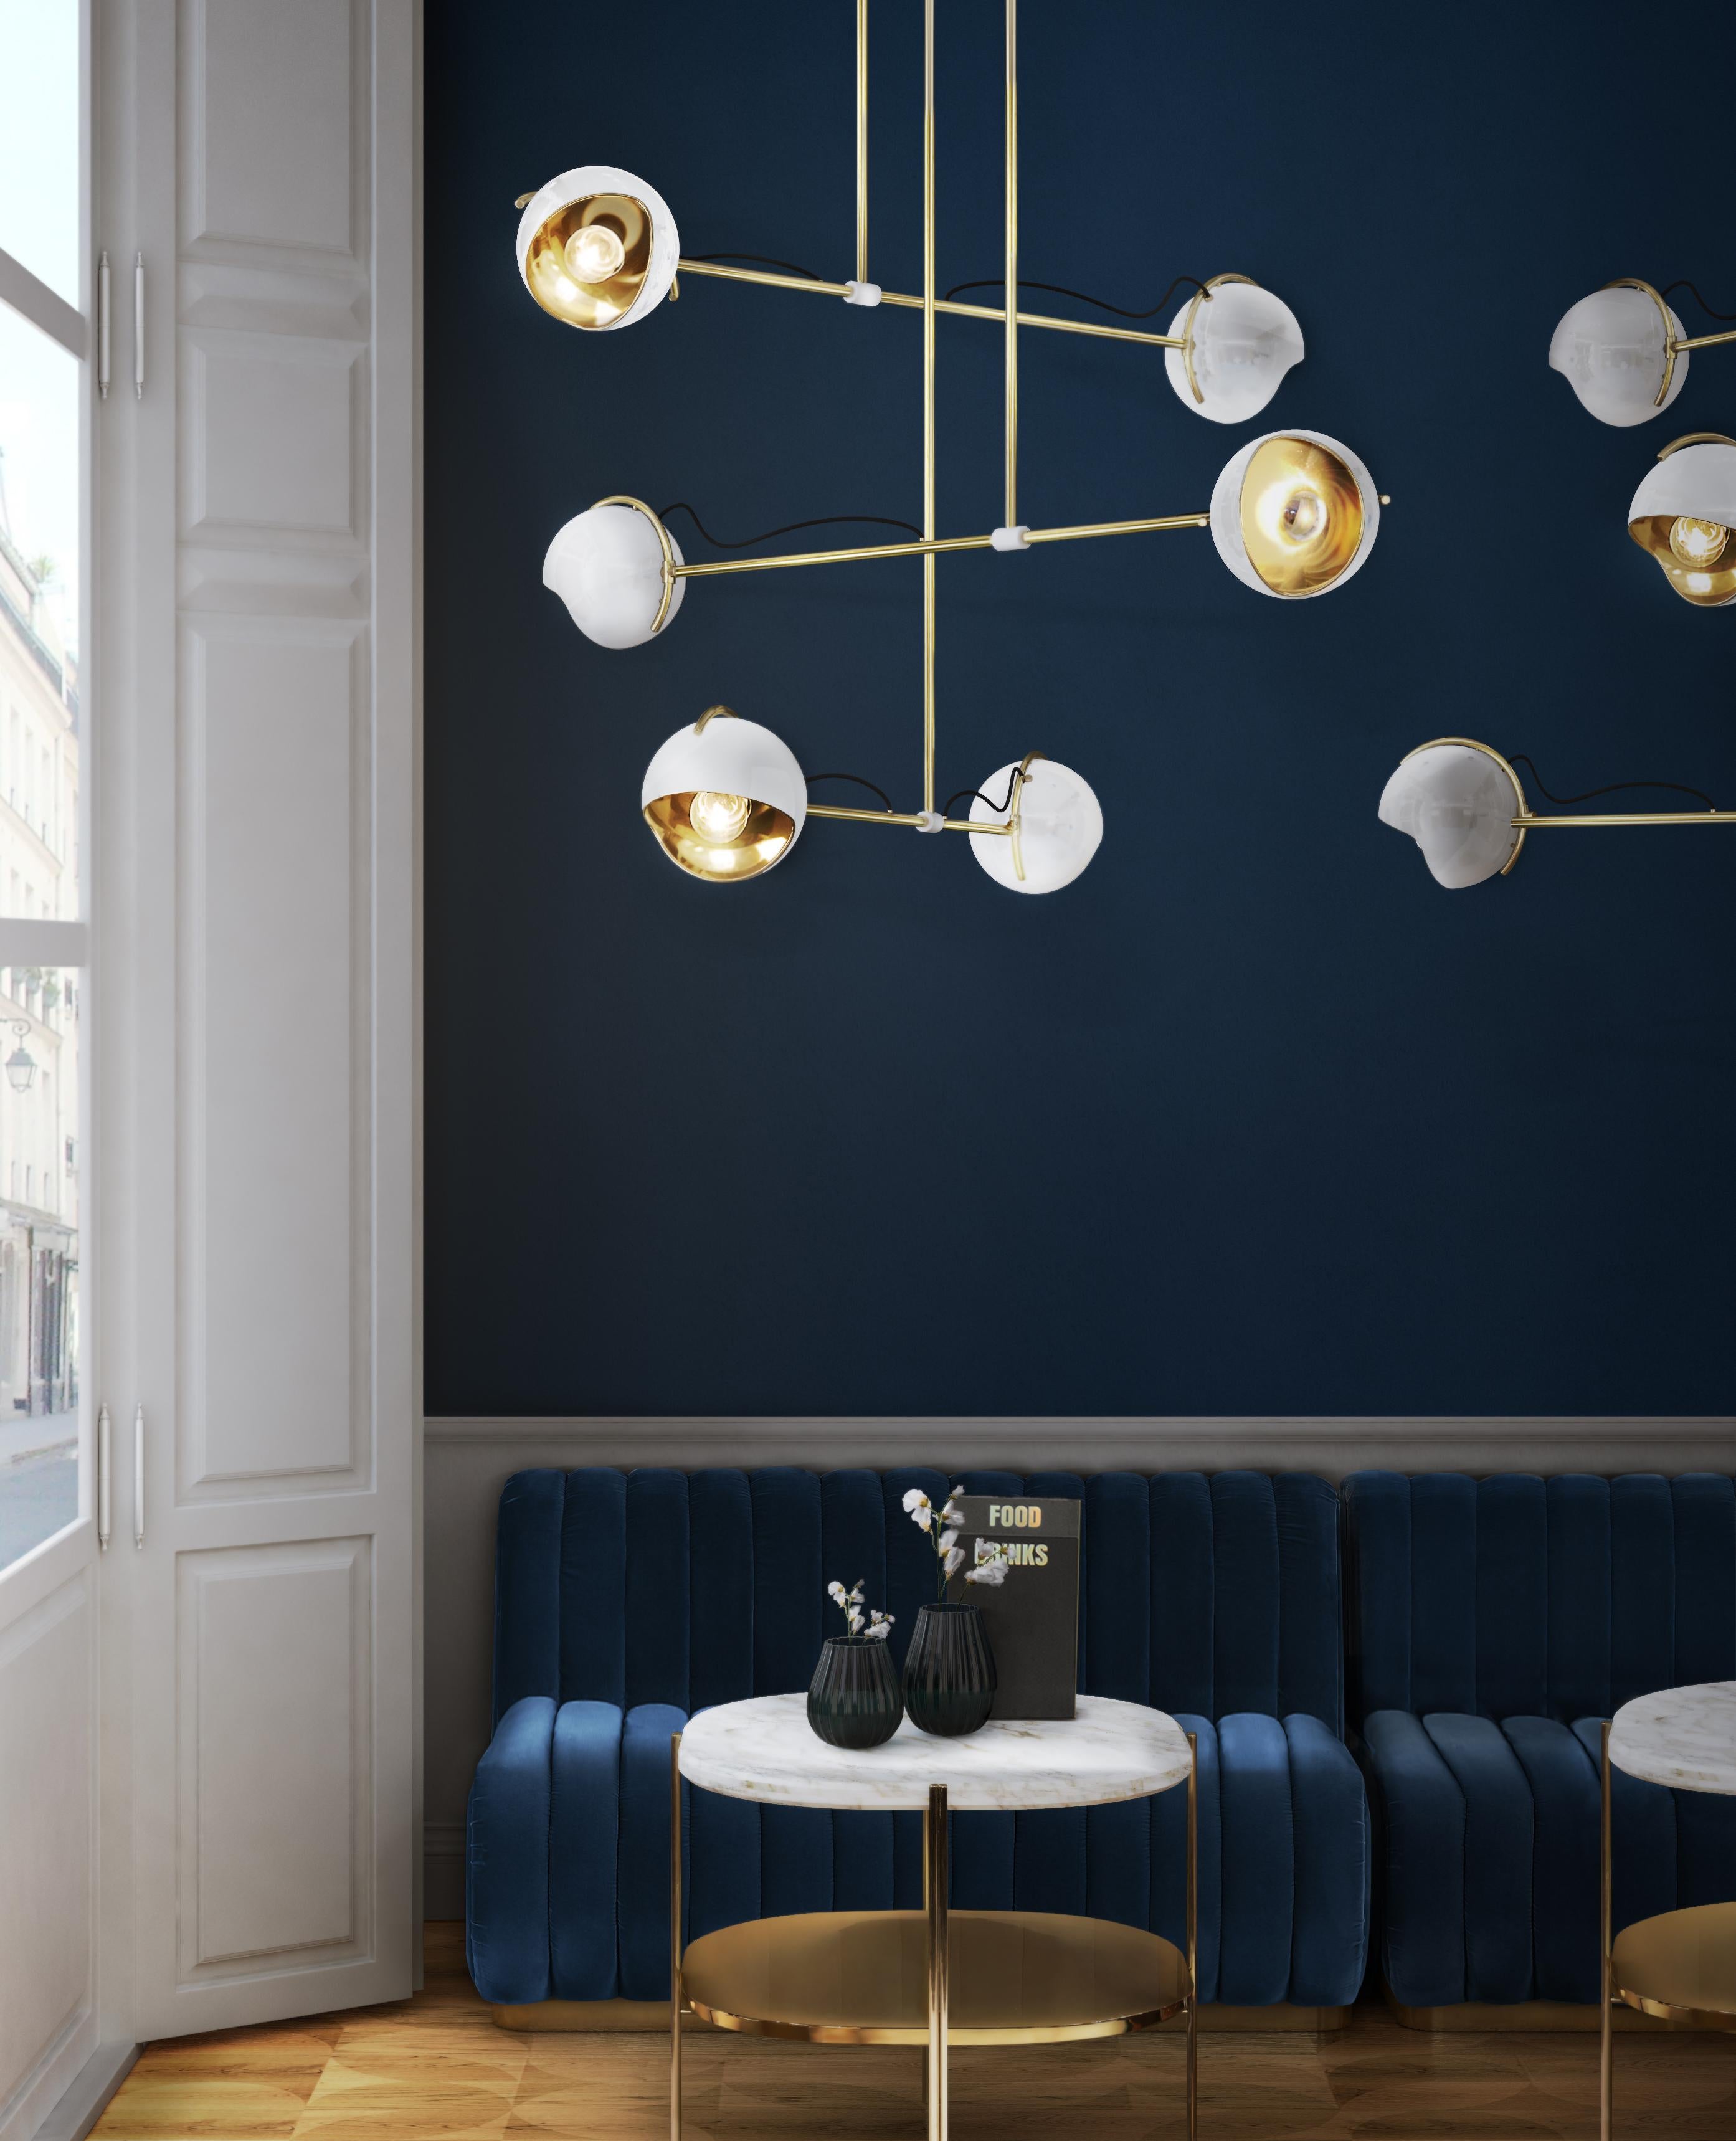 Delightfull designers created Laine suspension lamp with the midcentury vibe in mind. Inspired by the iconic era that brought so much culture to the world, this set of spotlights arranged like magic is in your home, this modern ceiling light comes